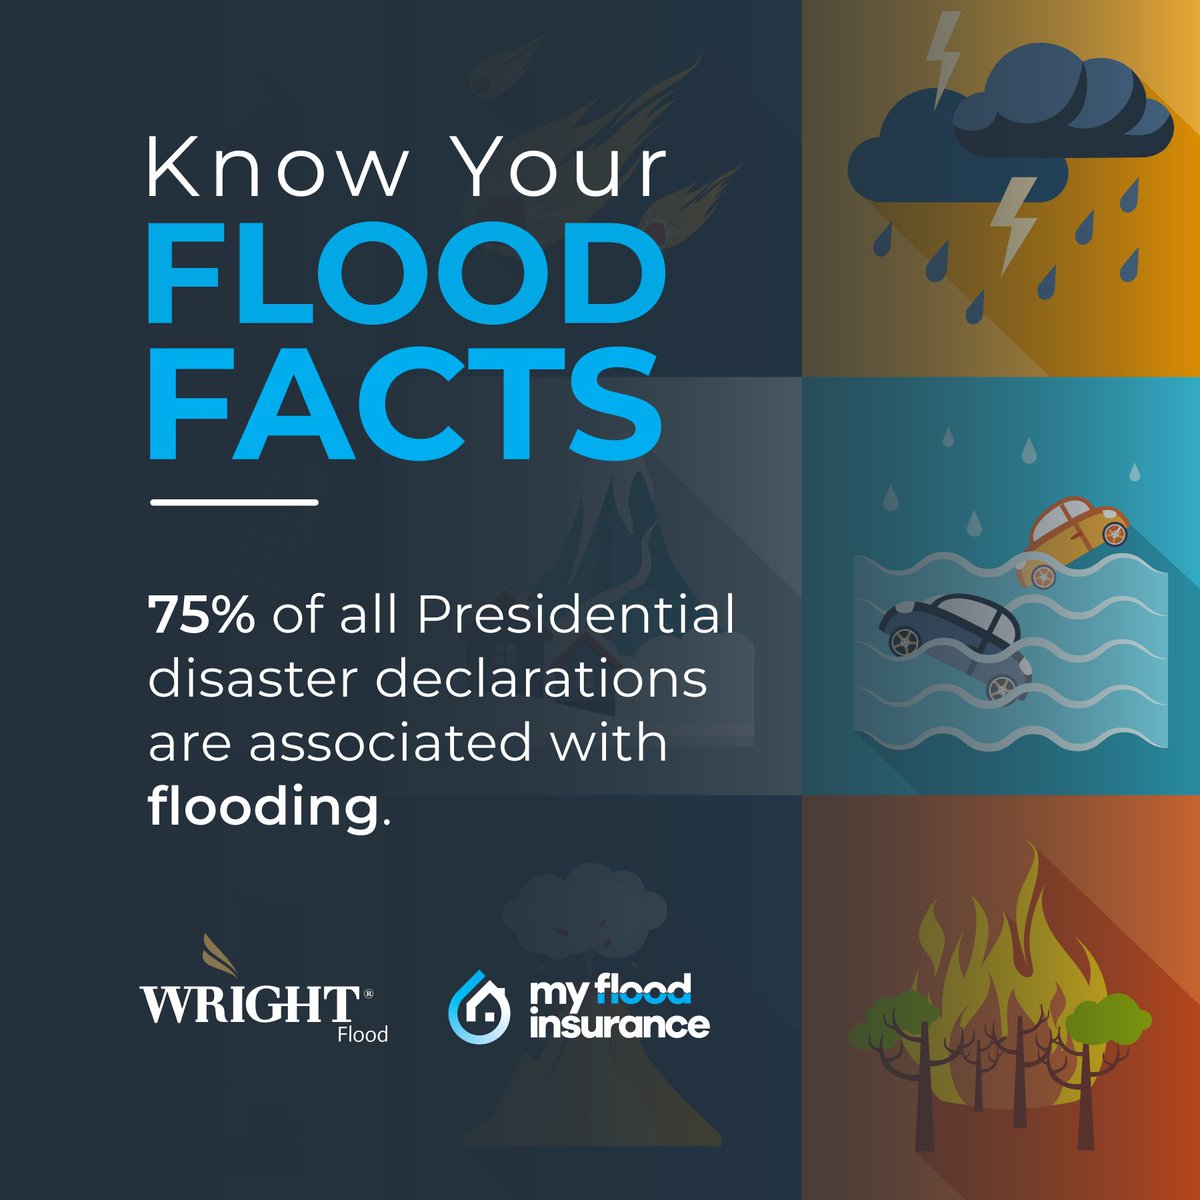 Flooding makes up for over 90% of all natural disasters in the United States. Never underestimate flooding. #floodfactfriday is brought to you by My Flood Insurance and @floodtweeter.

#flooding #floodinsurance #insurance #facts #naturaldisaster